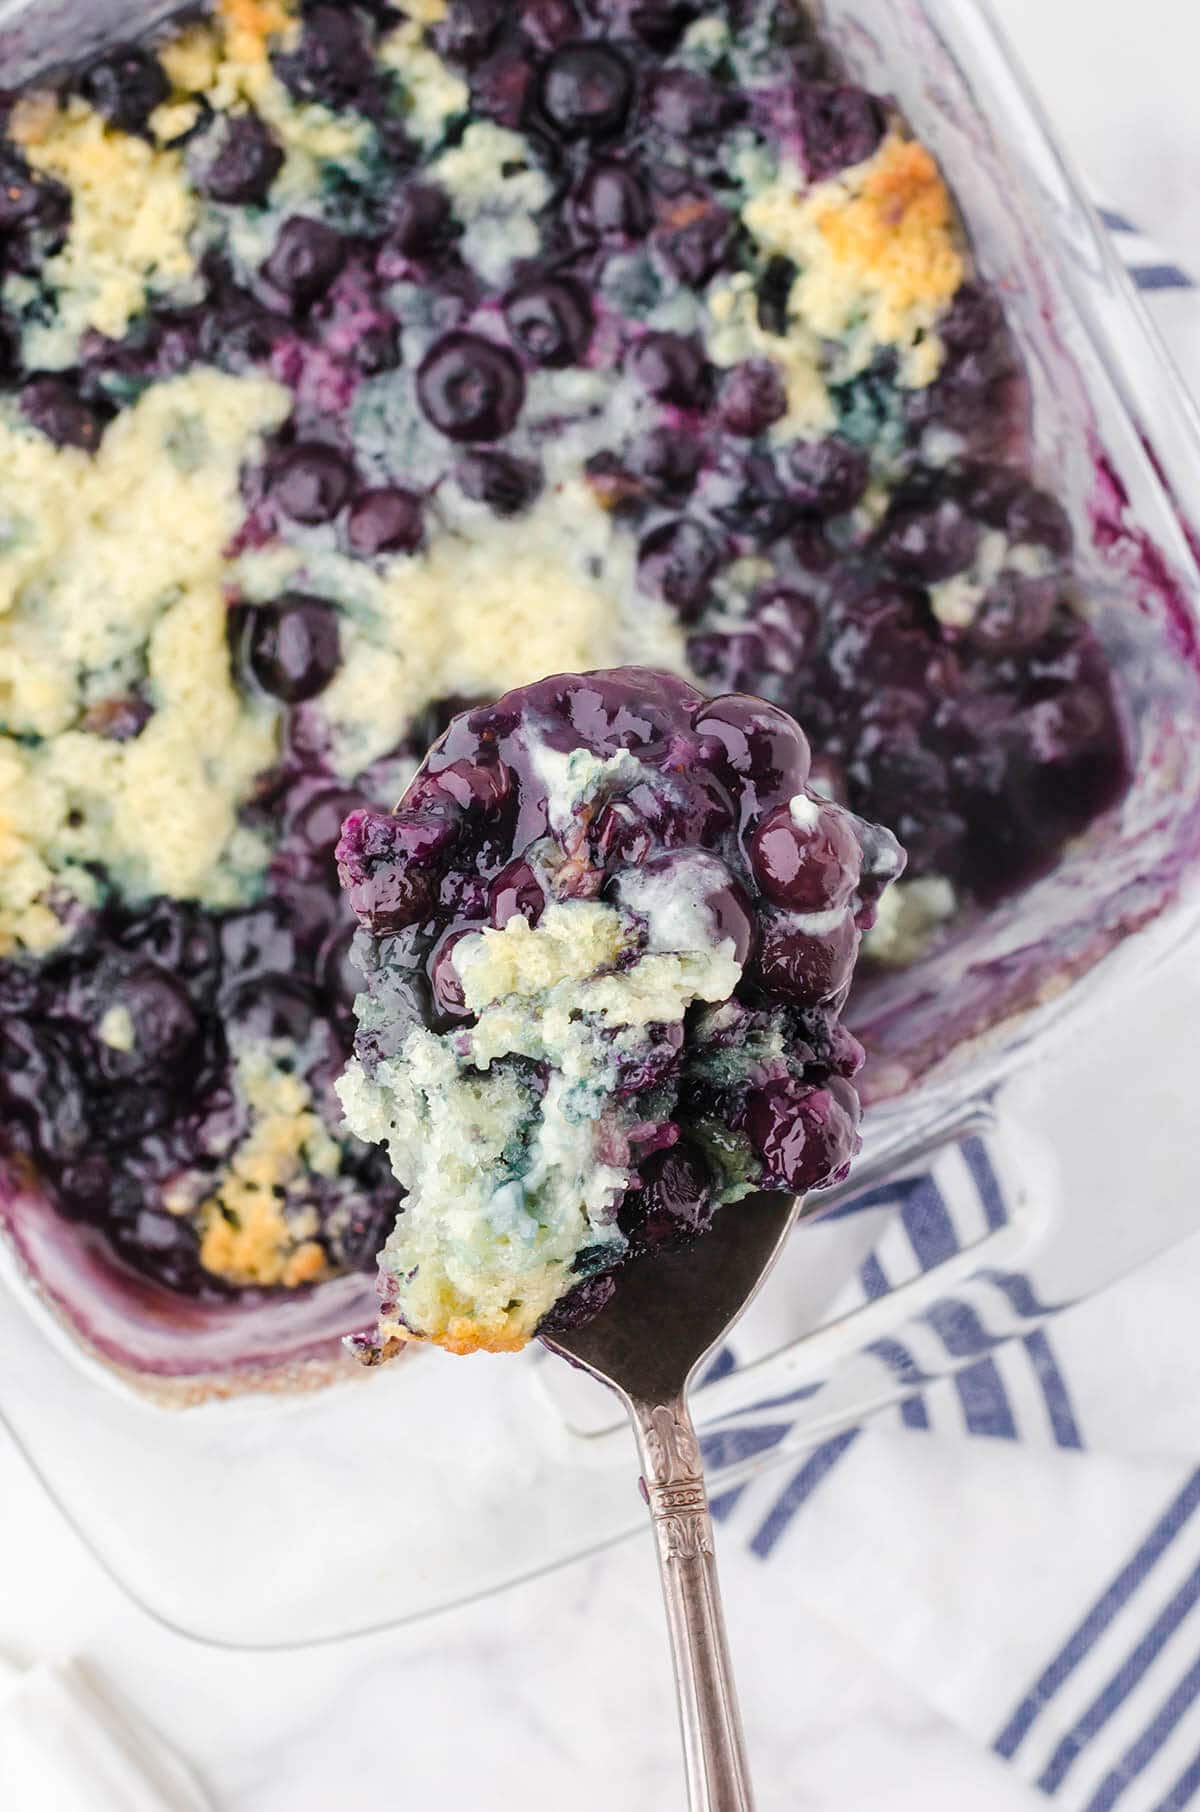 Juicy blueberry cobbler in baking dish with spoon scooping up a serving.